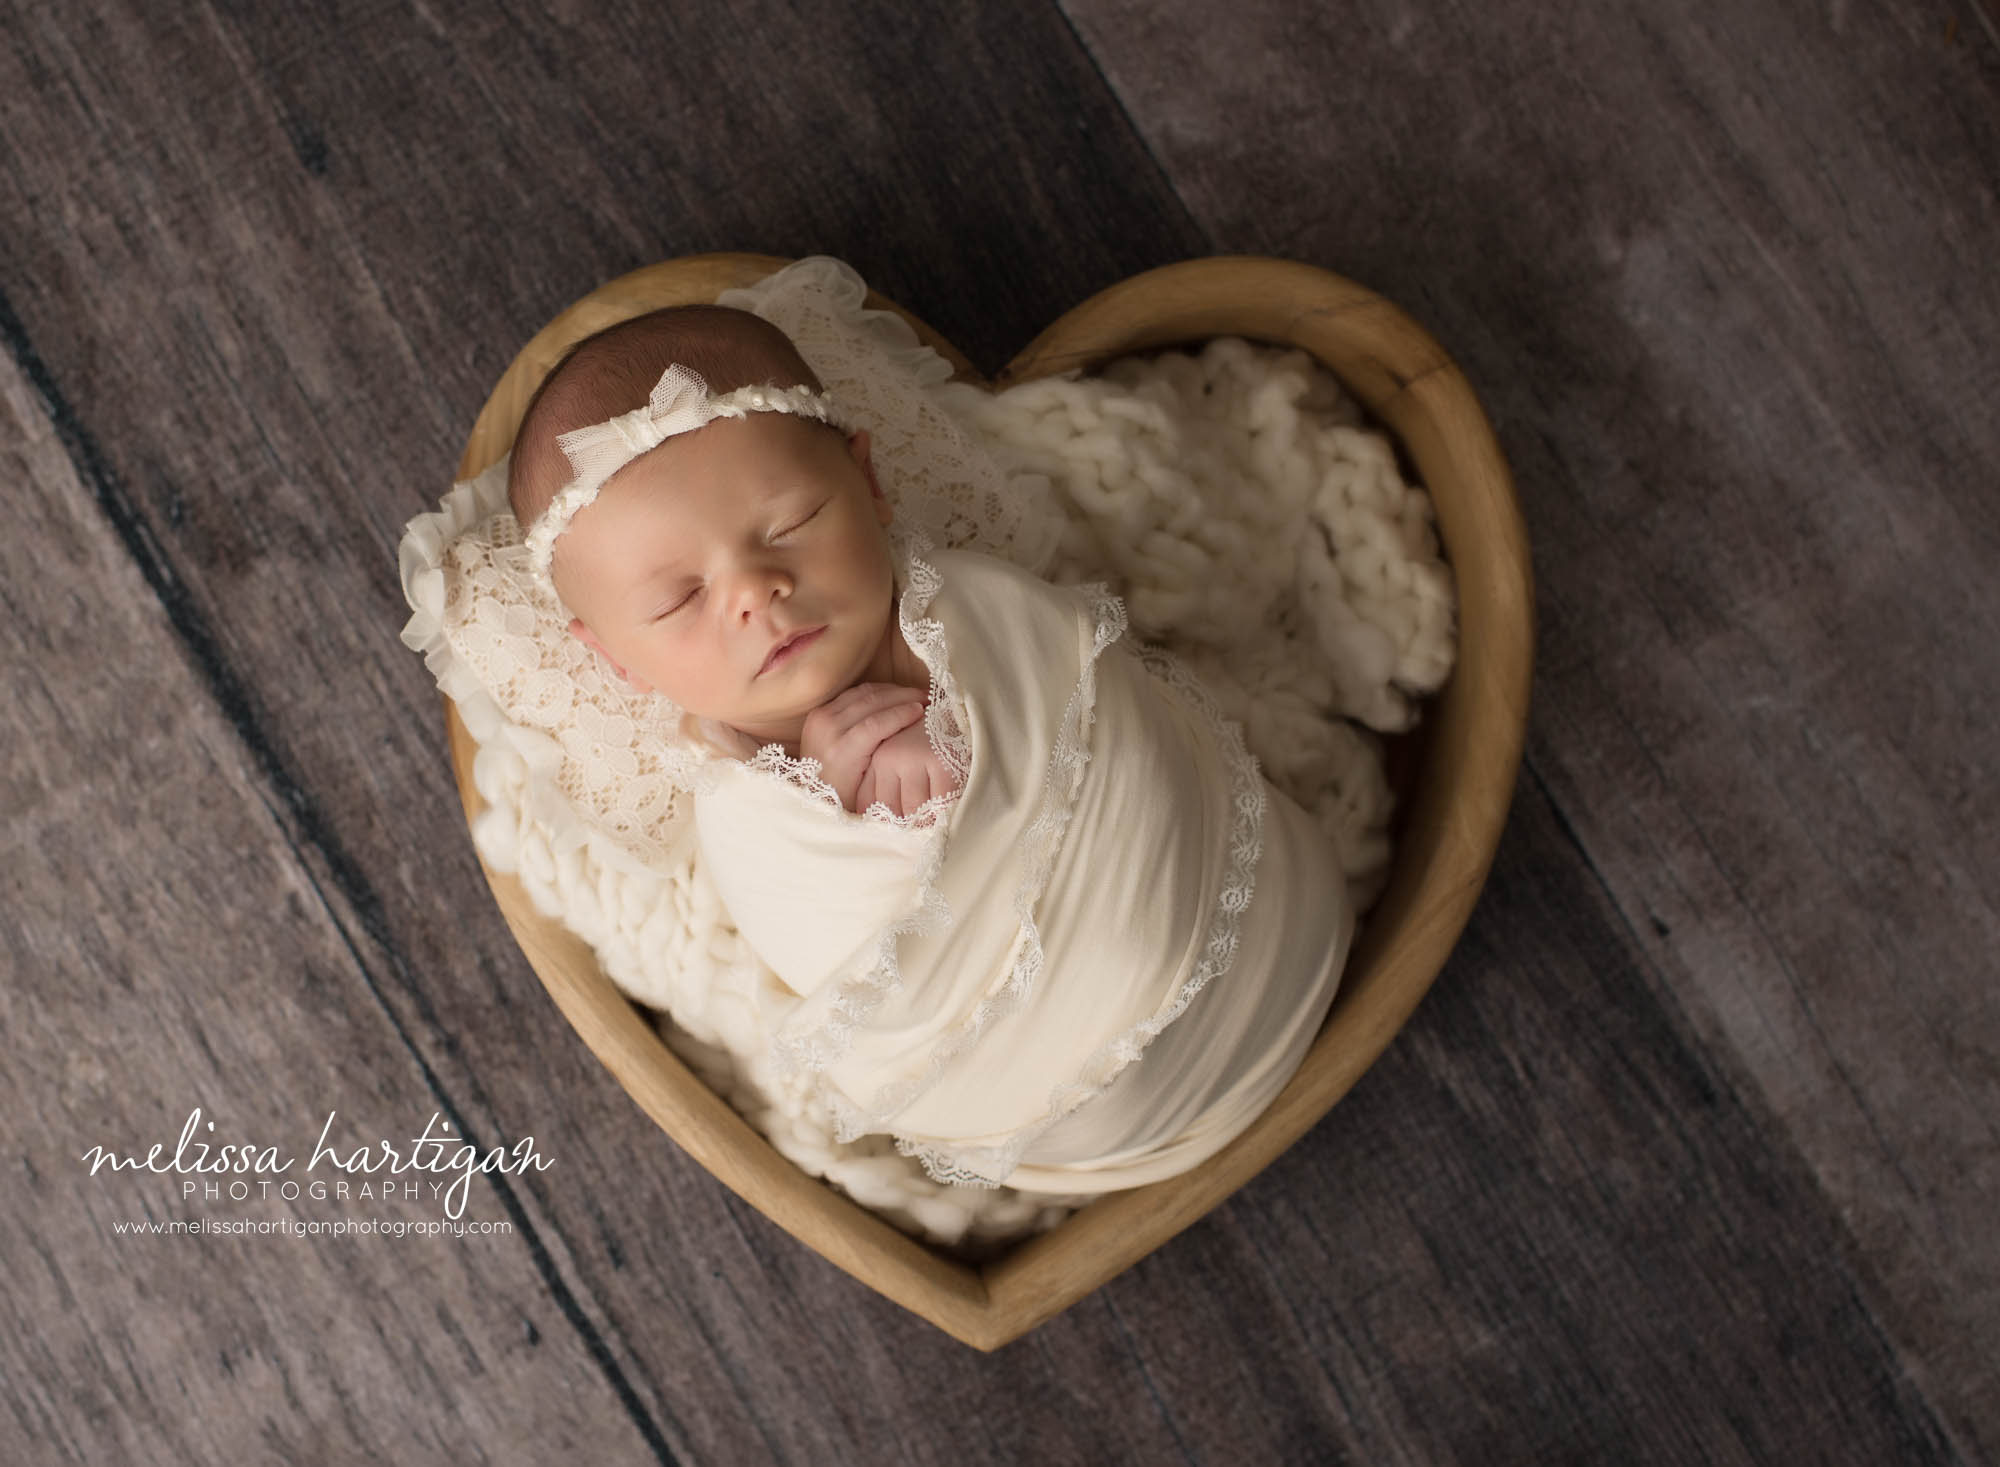 newborn baby girl wrapped in cream lace wrap posed in wooden heart bowl prop